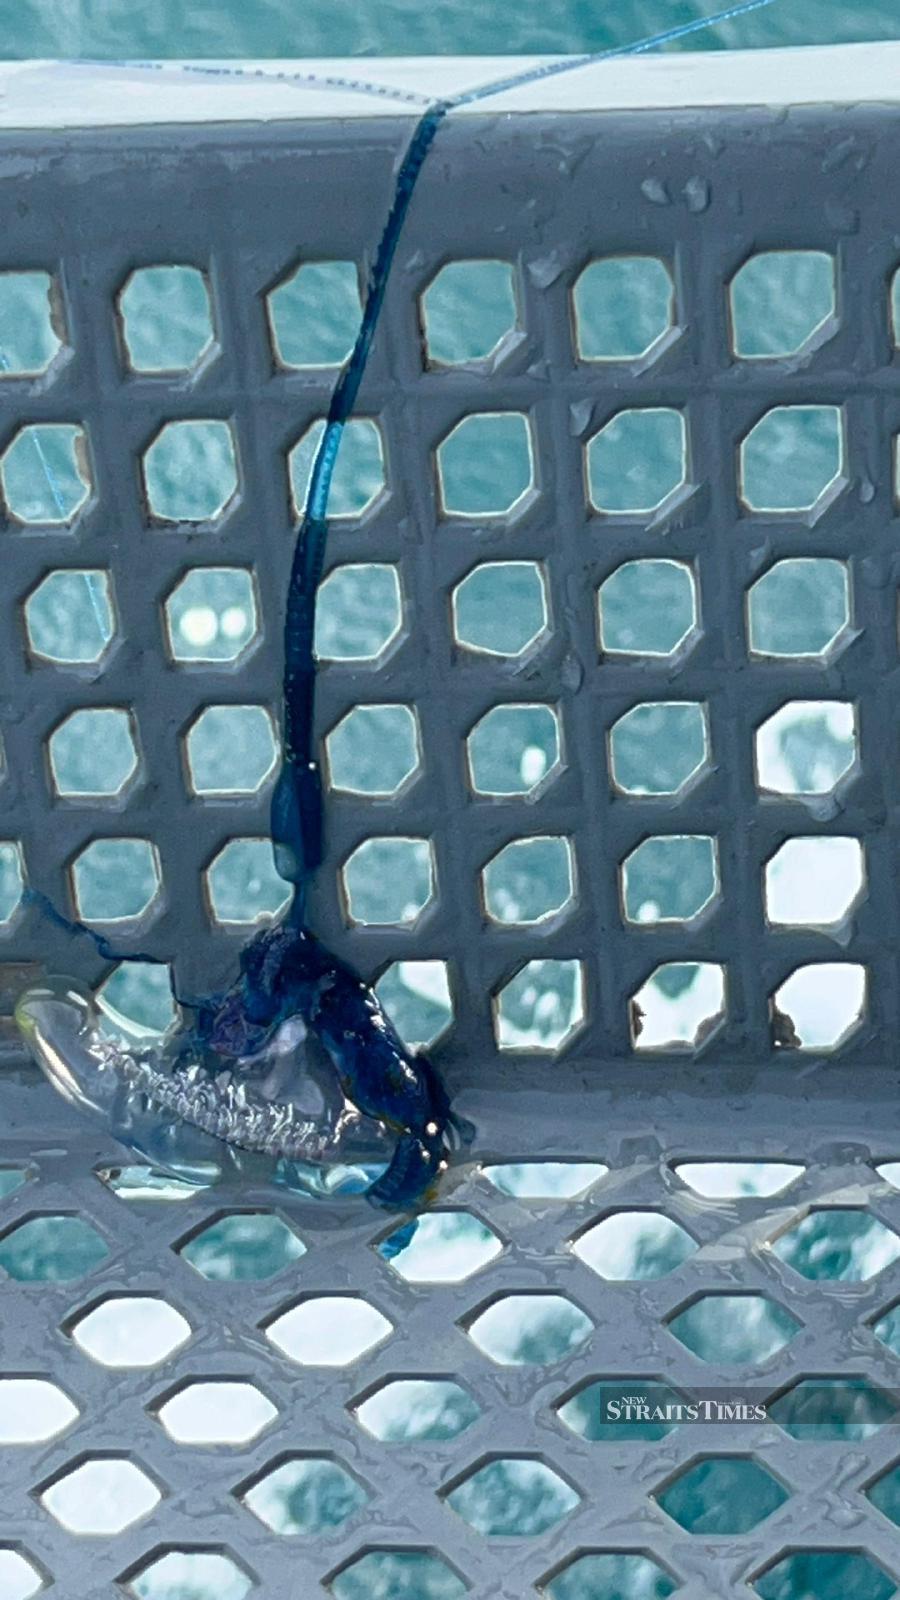  A Portuguese man o' war fished out of the water by the team during the swim.